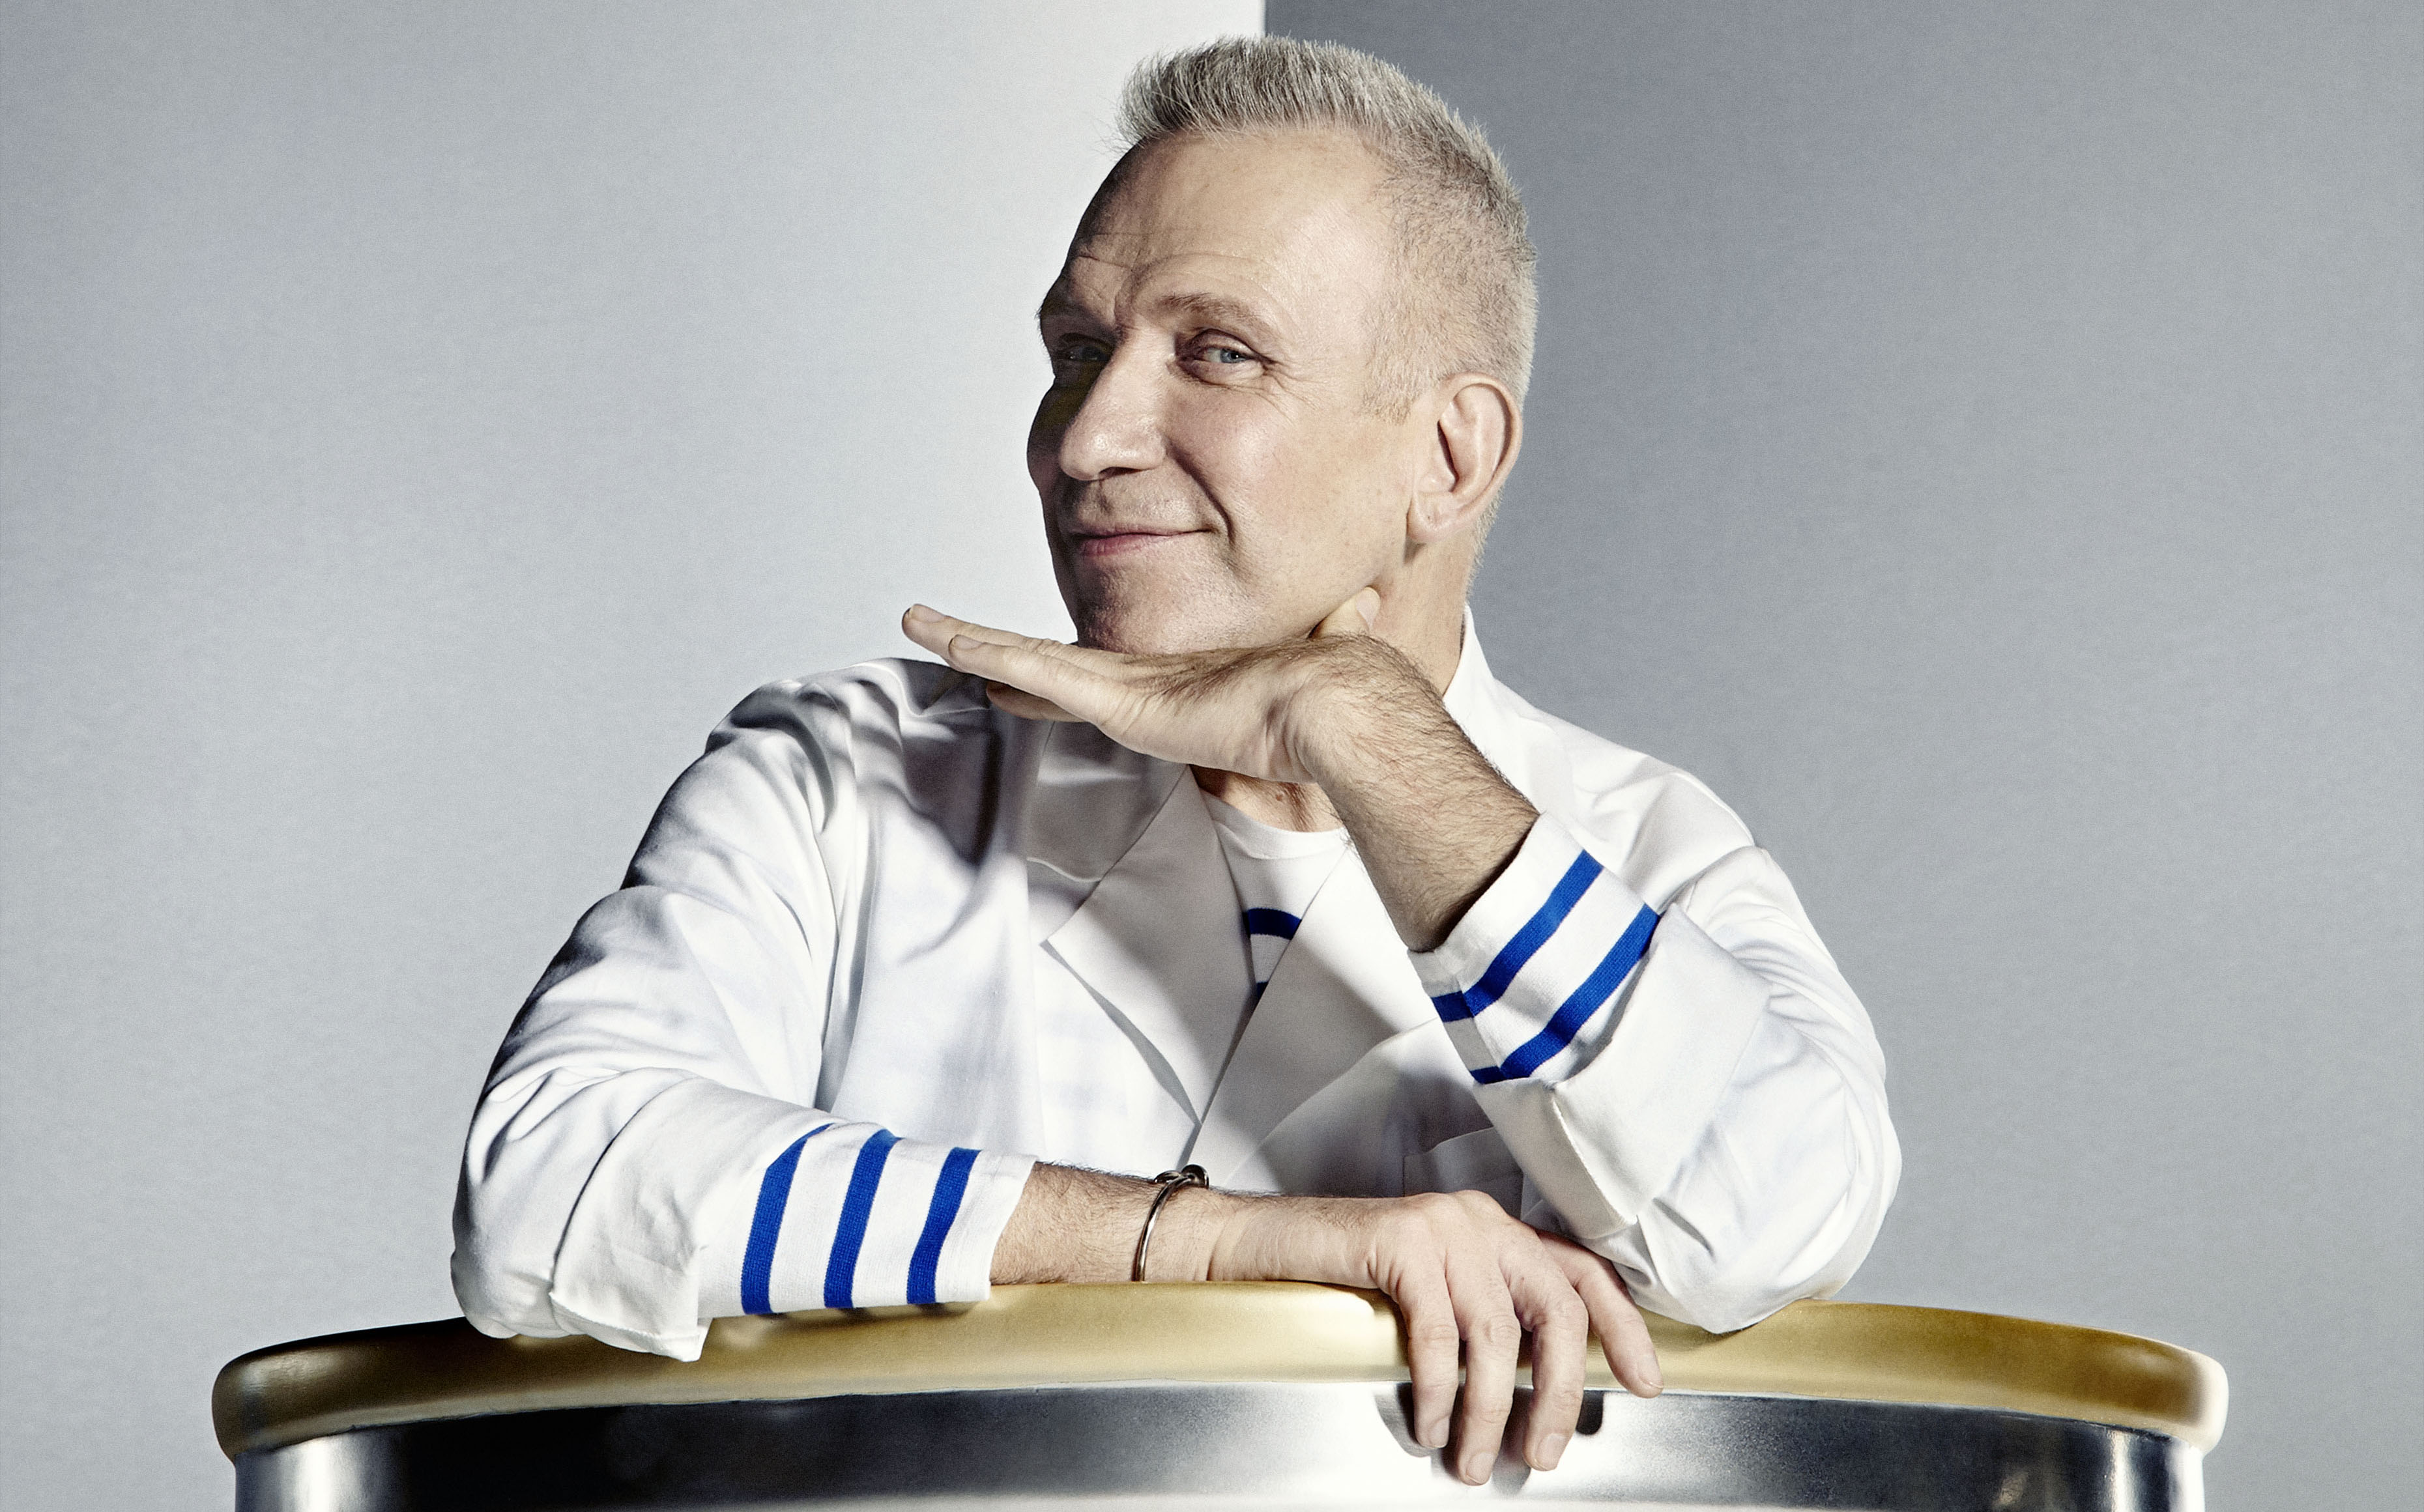 Jean Paul Gaultier on Fashion Freak Show and why “there's not one kind of  beauty”